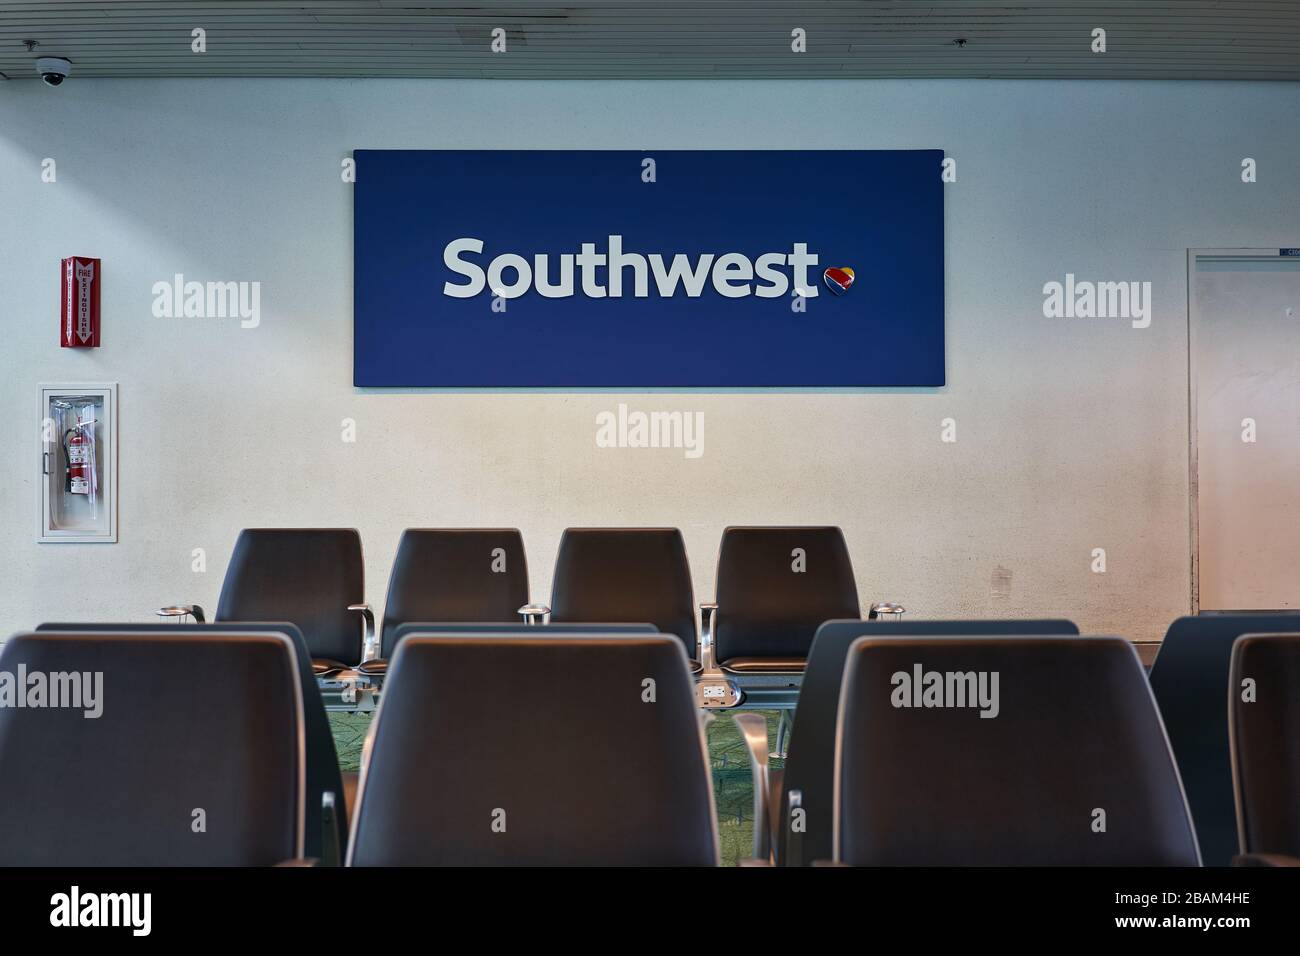 The Southwest sign is seen at a boarding gate in Portland International Airport on Feb 7, 2020, with rows of empty seats in the foreground. Stock Photo